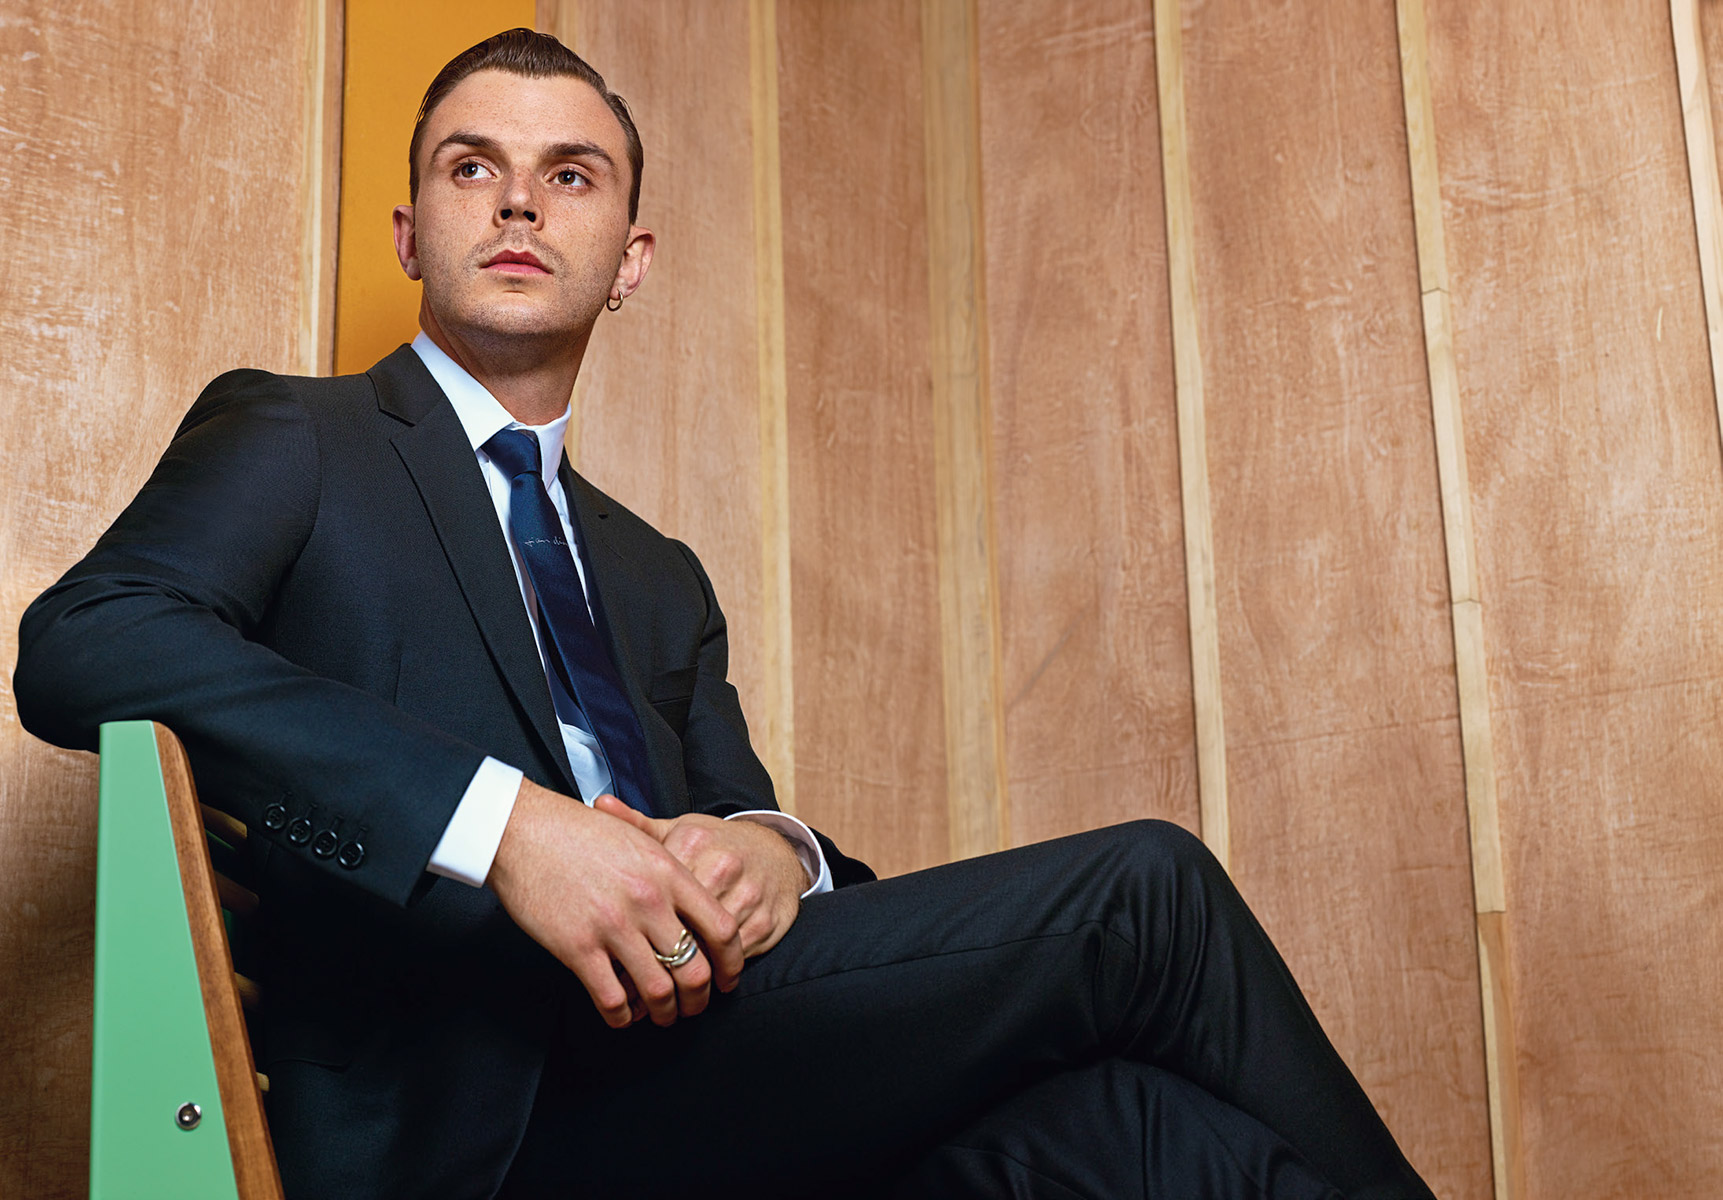 Theo Hutchcraft Stars in Zoo Cover Photo Shoot Wearing Dior Homme